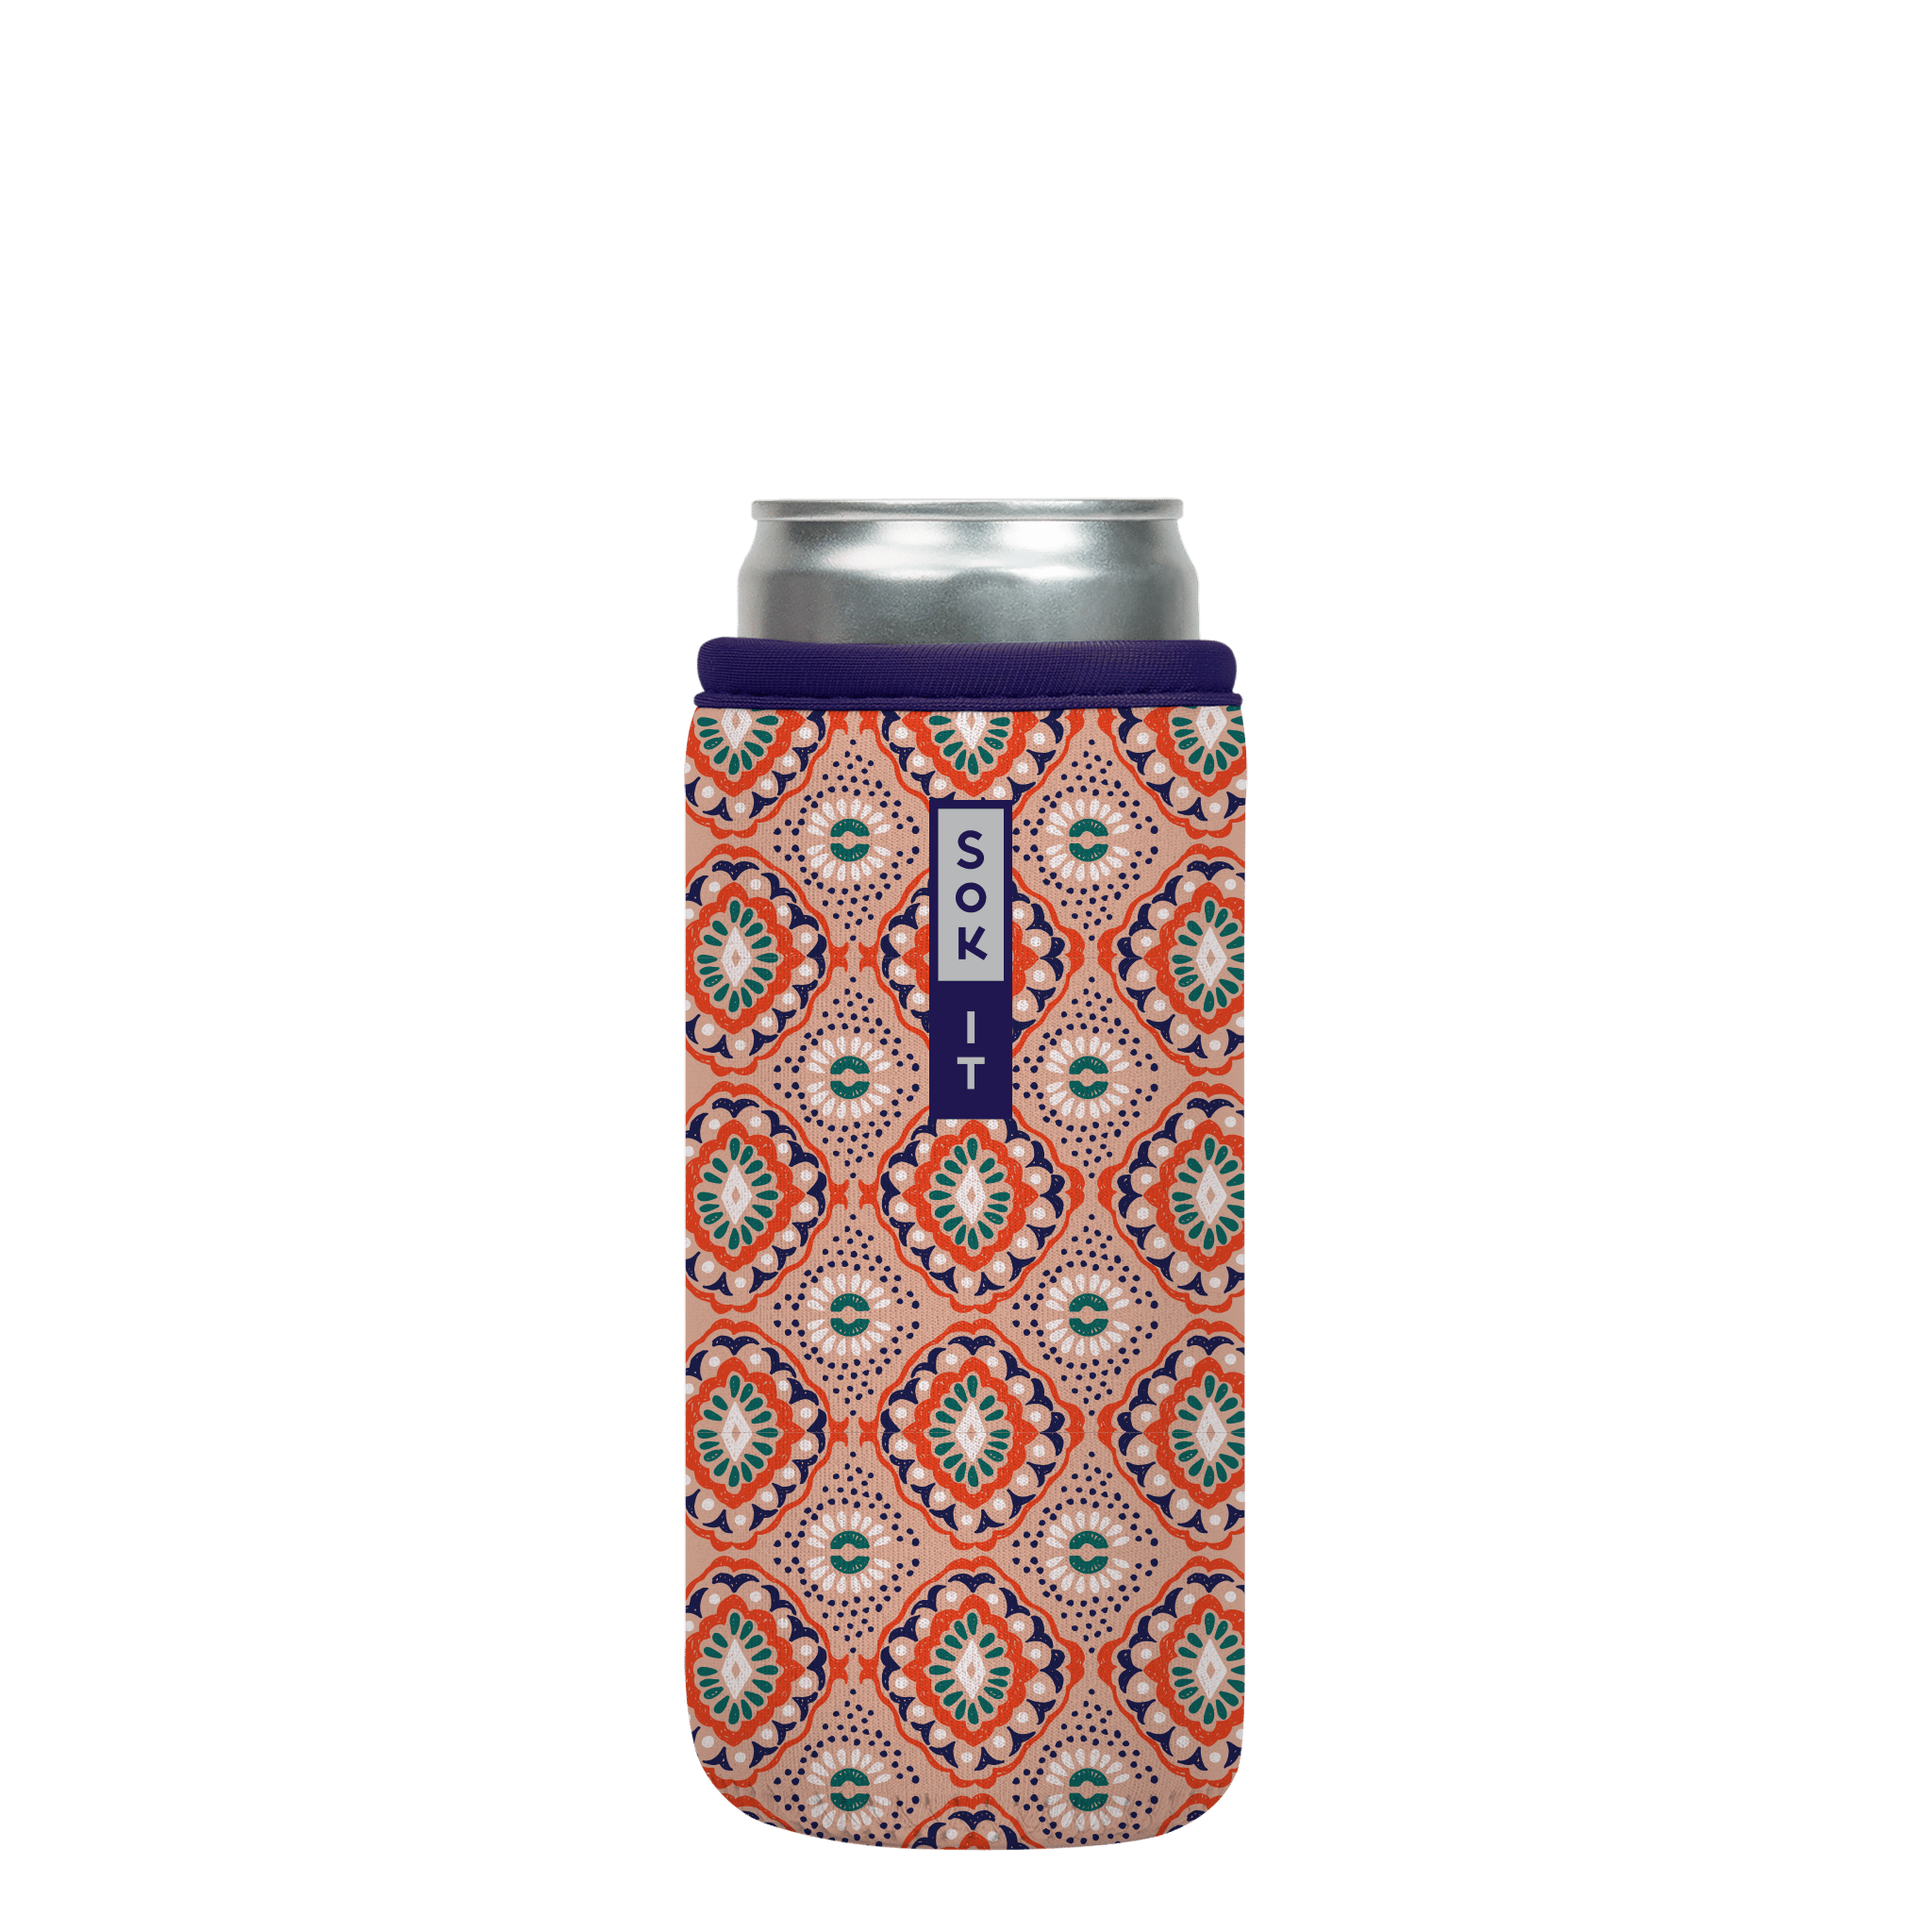 CanSok Folklore 12oz Slim Can